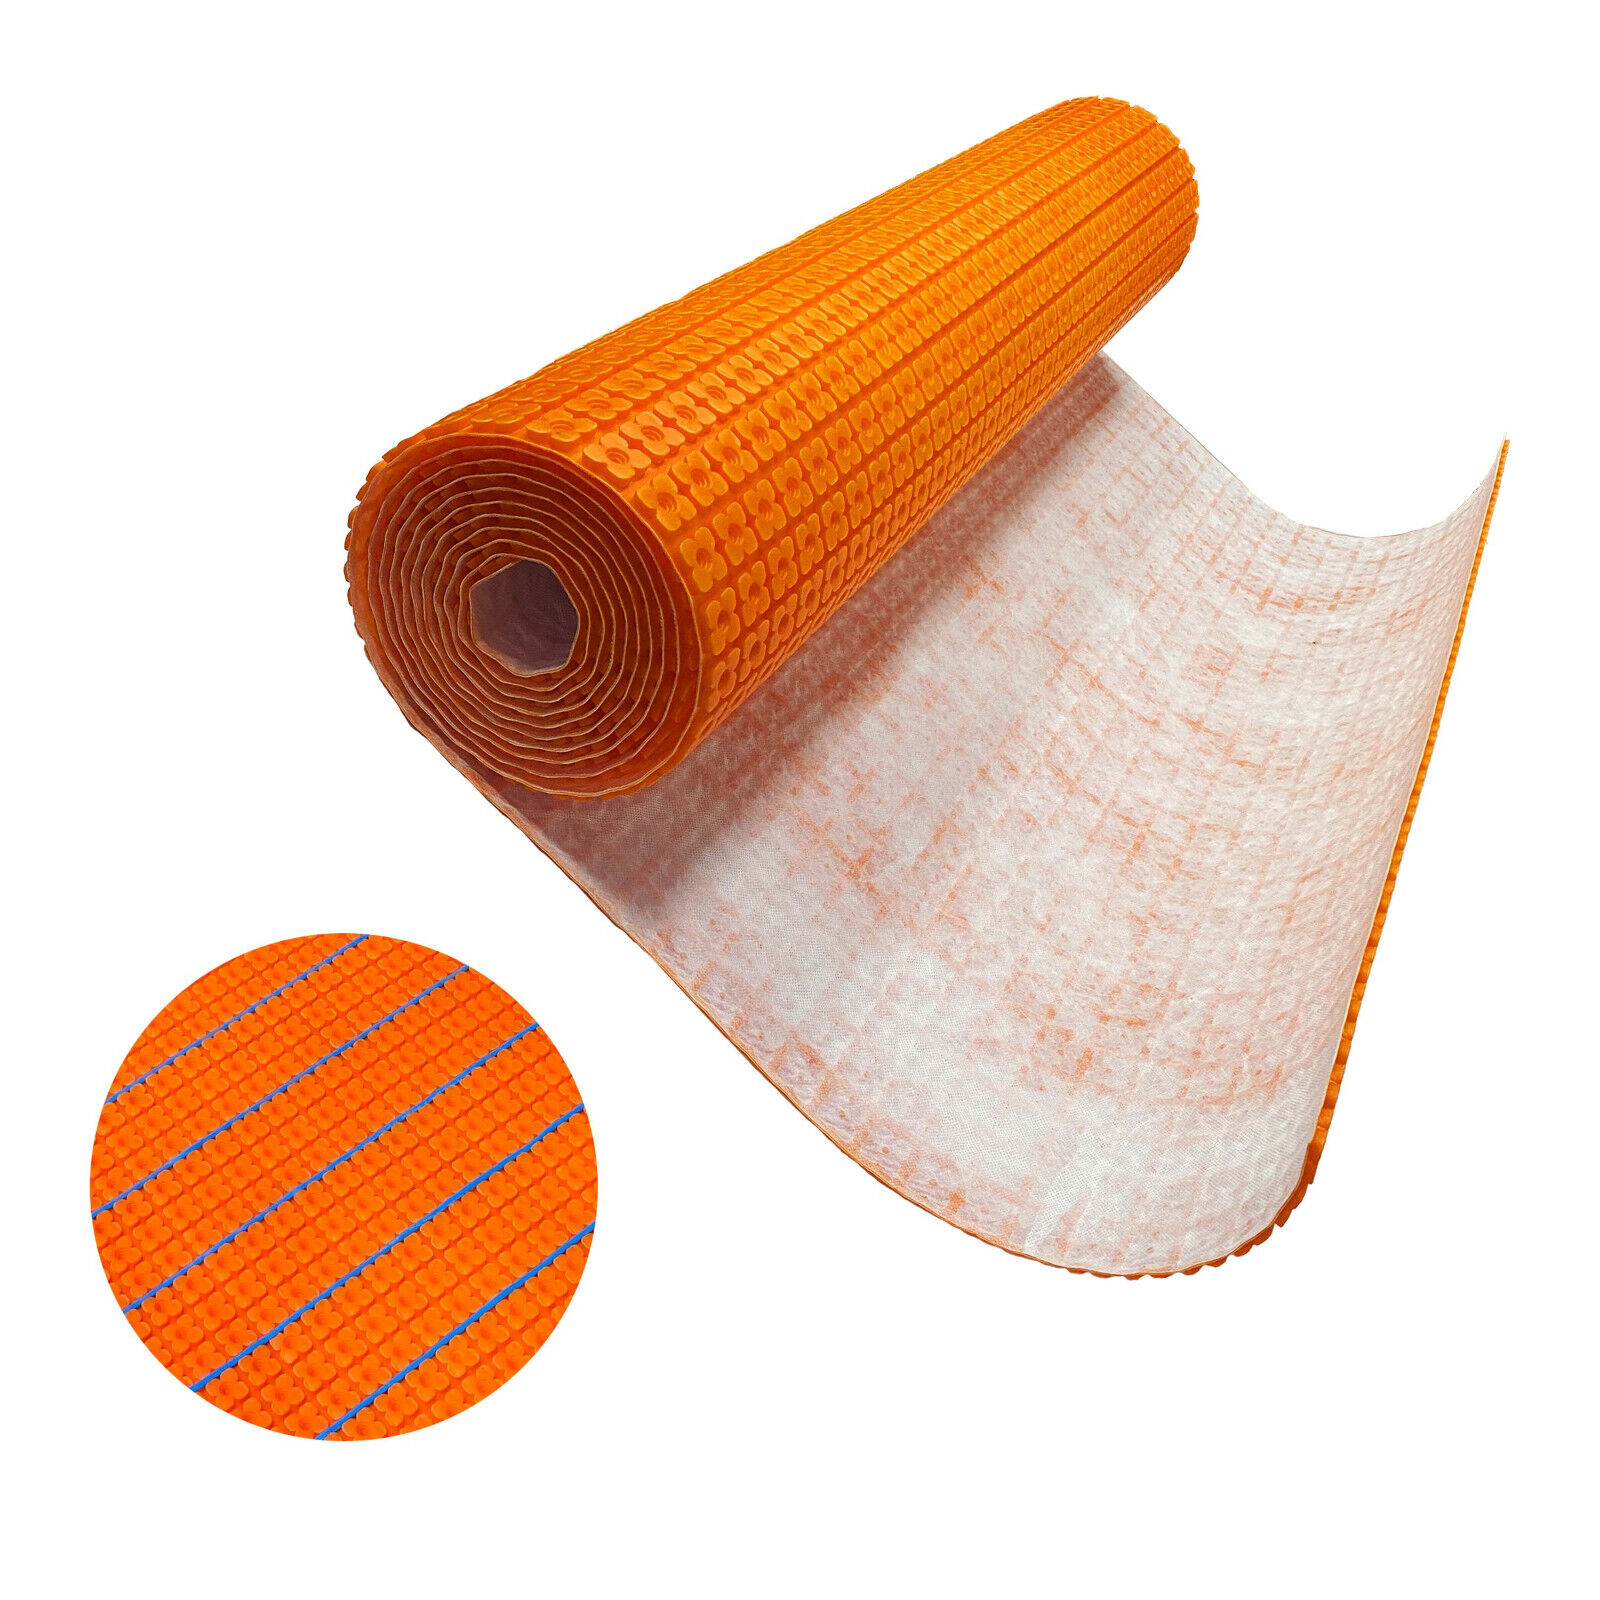 MAXKOSKO Uncoupling Membrane 54 to 161 sq ft,Heating Cable Underlayment Membrane